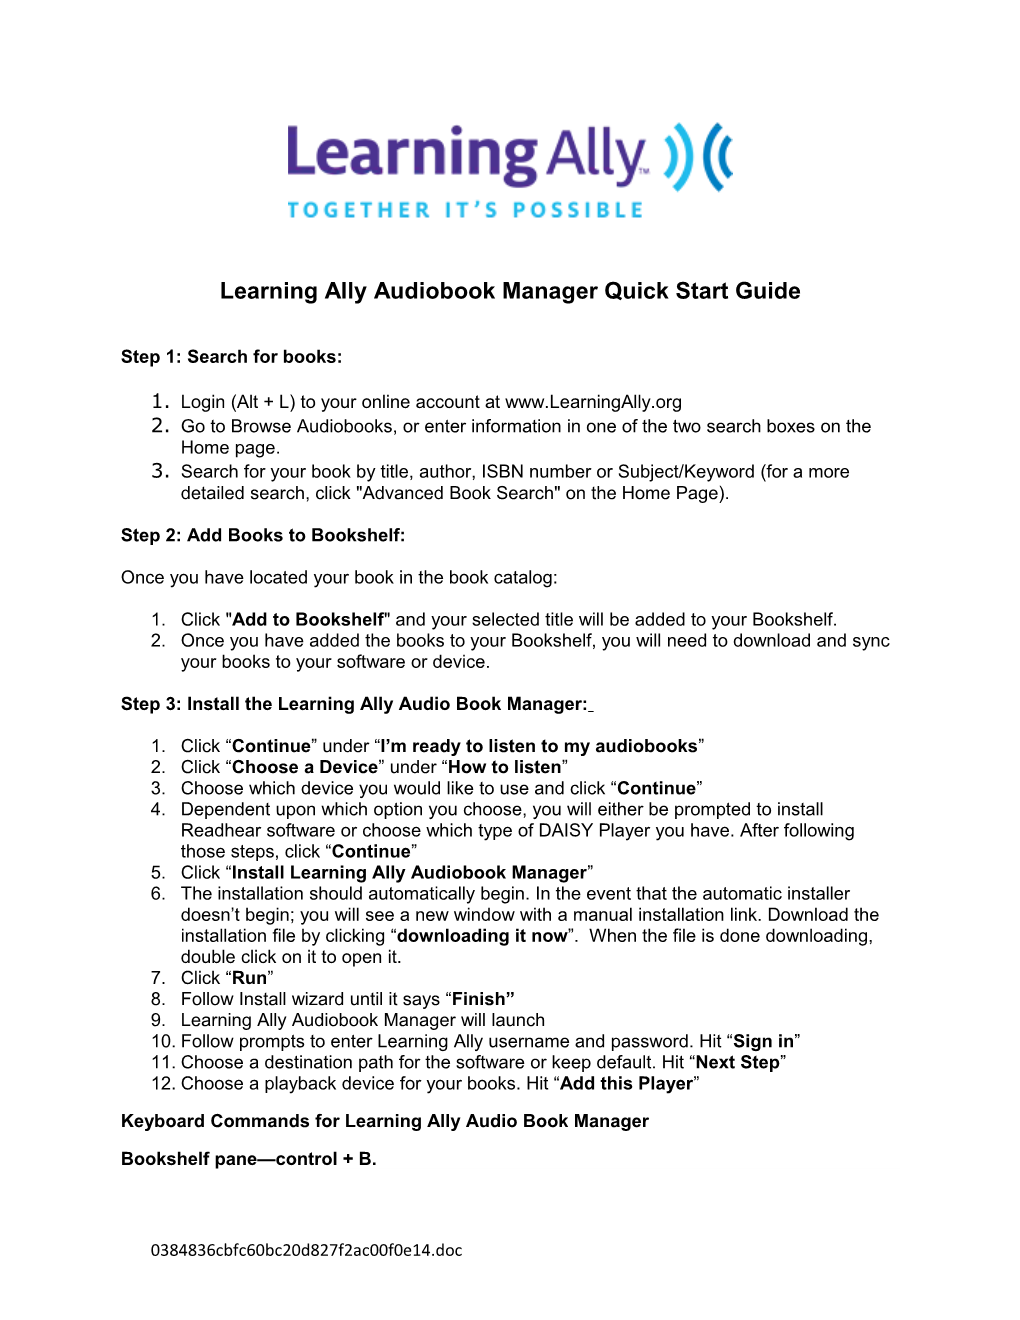 Learning Ally Audiobook Manager Quick Start Guide